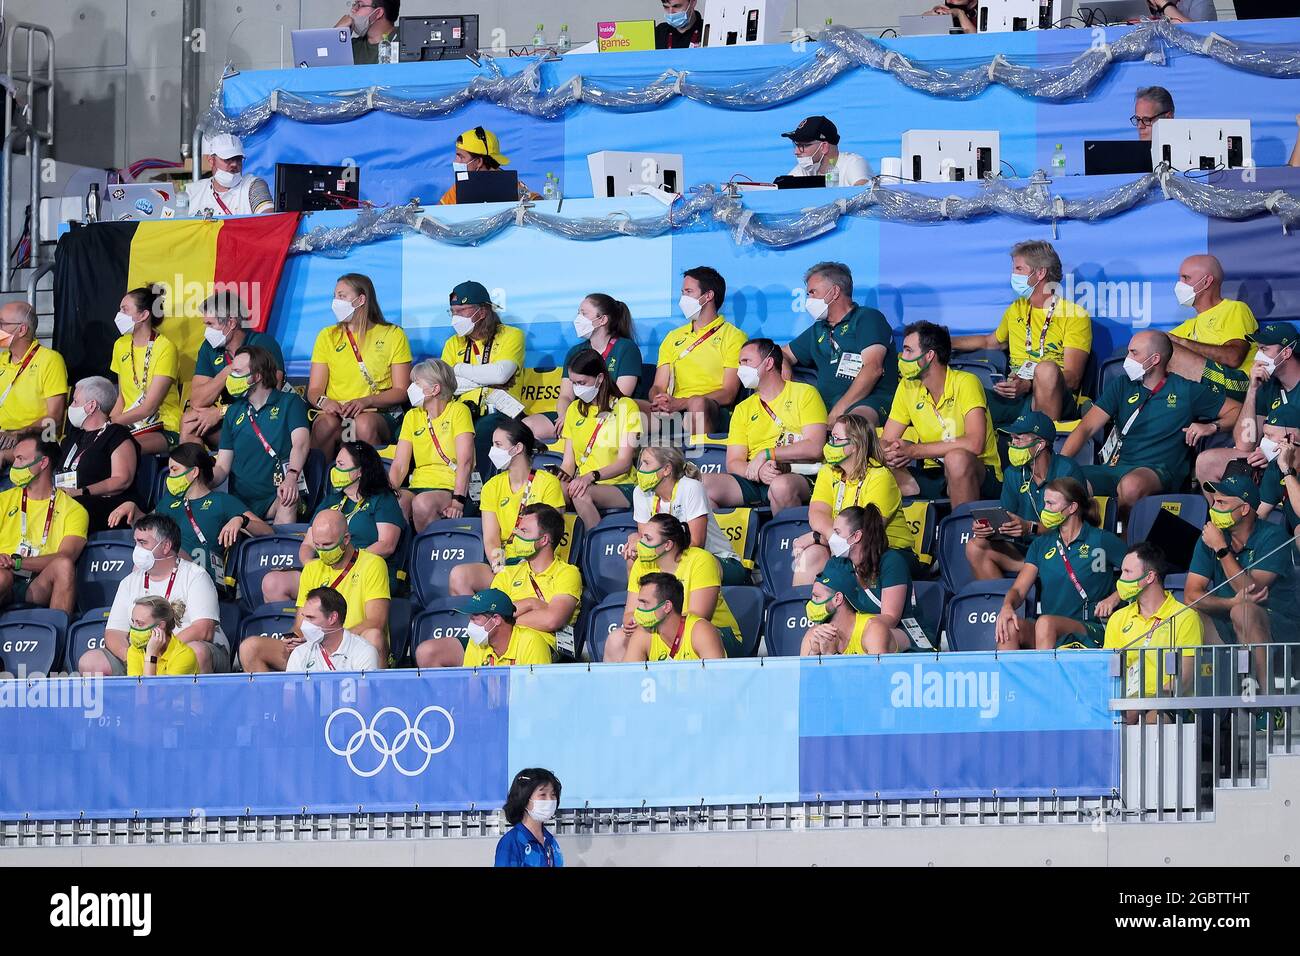 Tokyo, Japan, 5 August, 2021. Team Australia members during the Men's Hockey Gold Medal match between Australia and Belgium on Day 13 of the Tokyo 2020 Olympic Games. Credit: Pete Dovgan/Speed Media/Alamy Live News Stock Photo